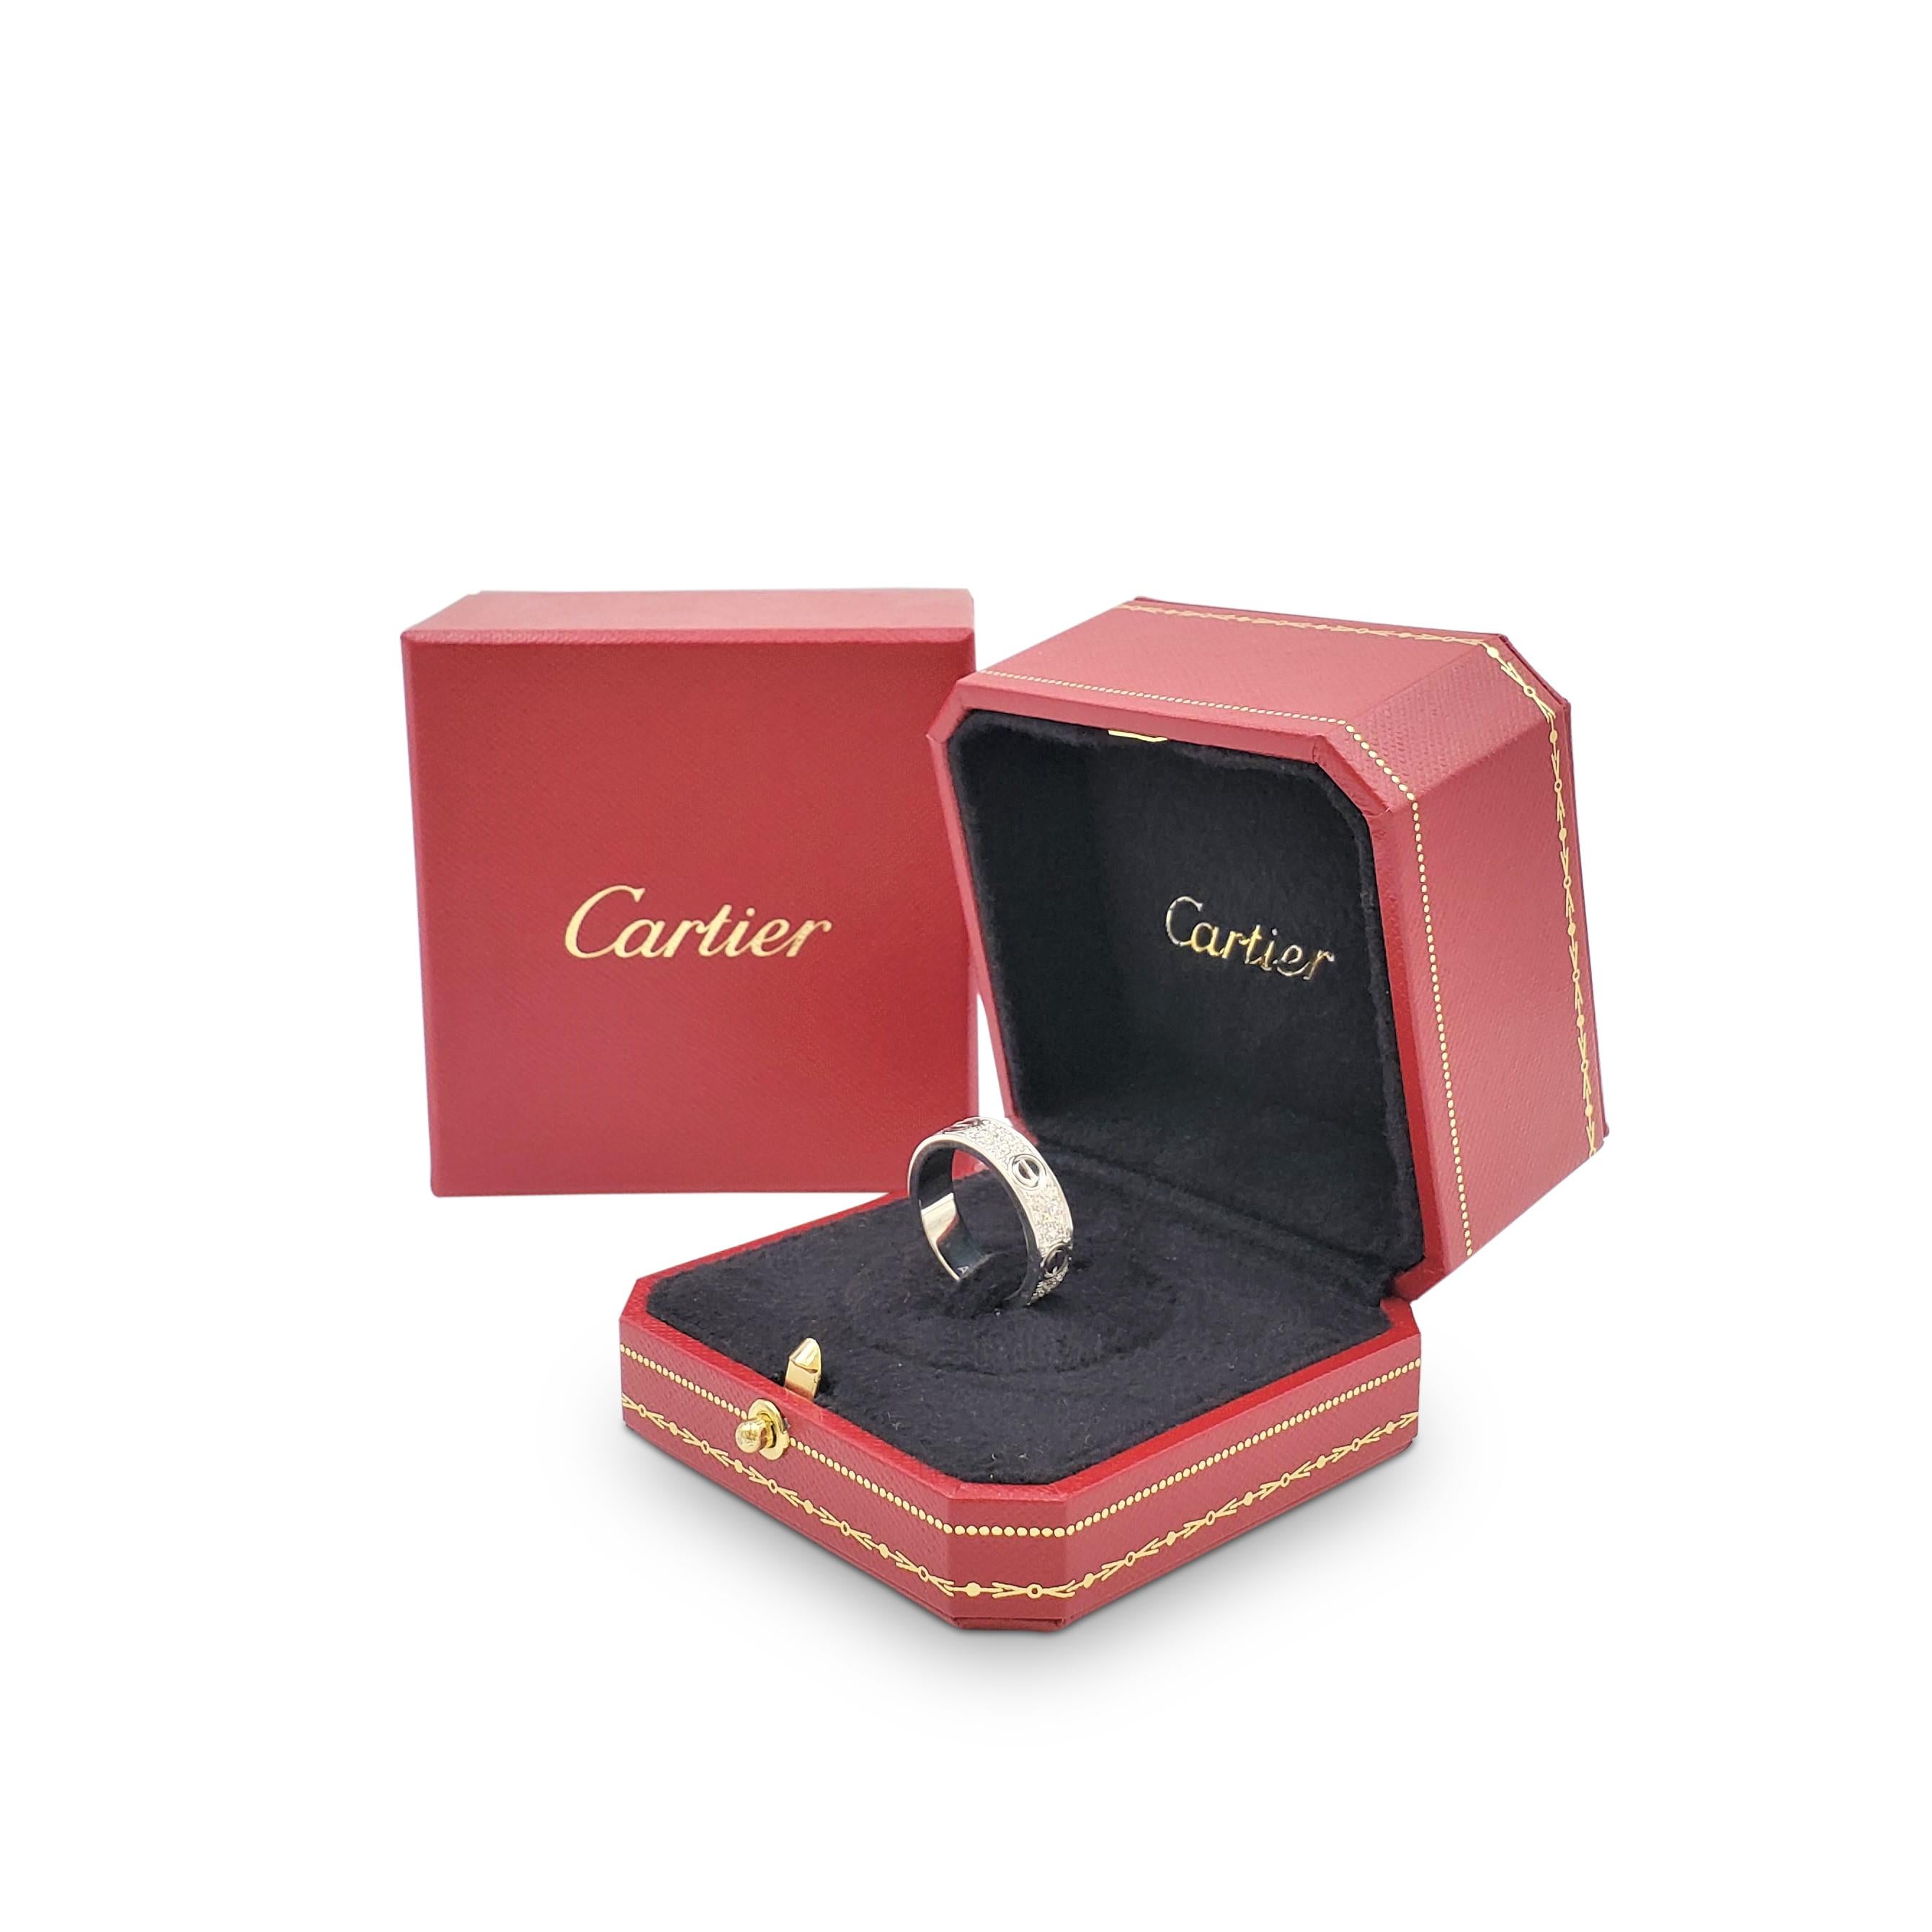 Cartier 'Love' White Gold and Diamond Pave Ring In Excellent Condition For Sale In New York, NY